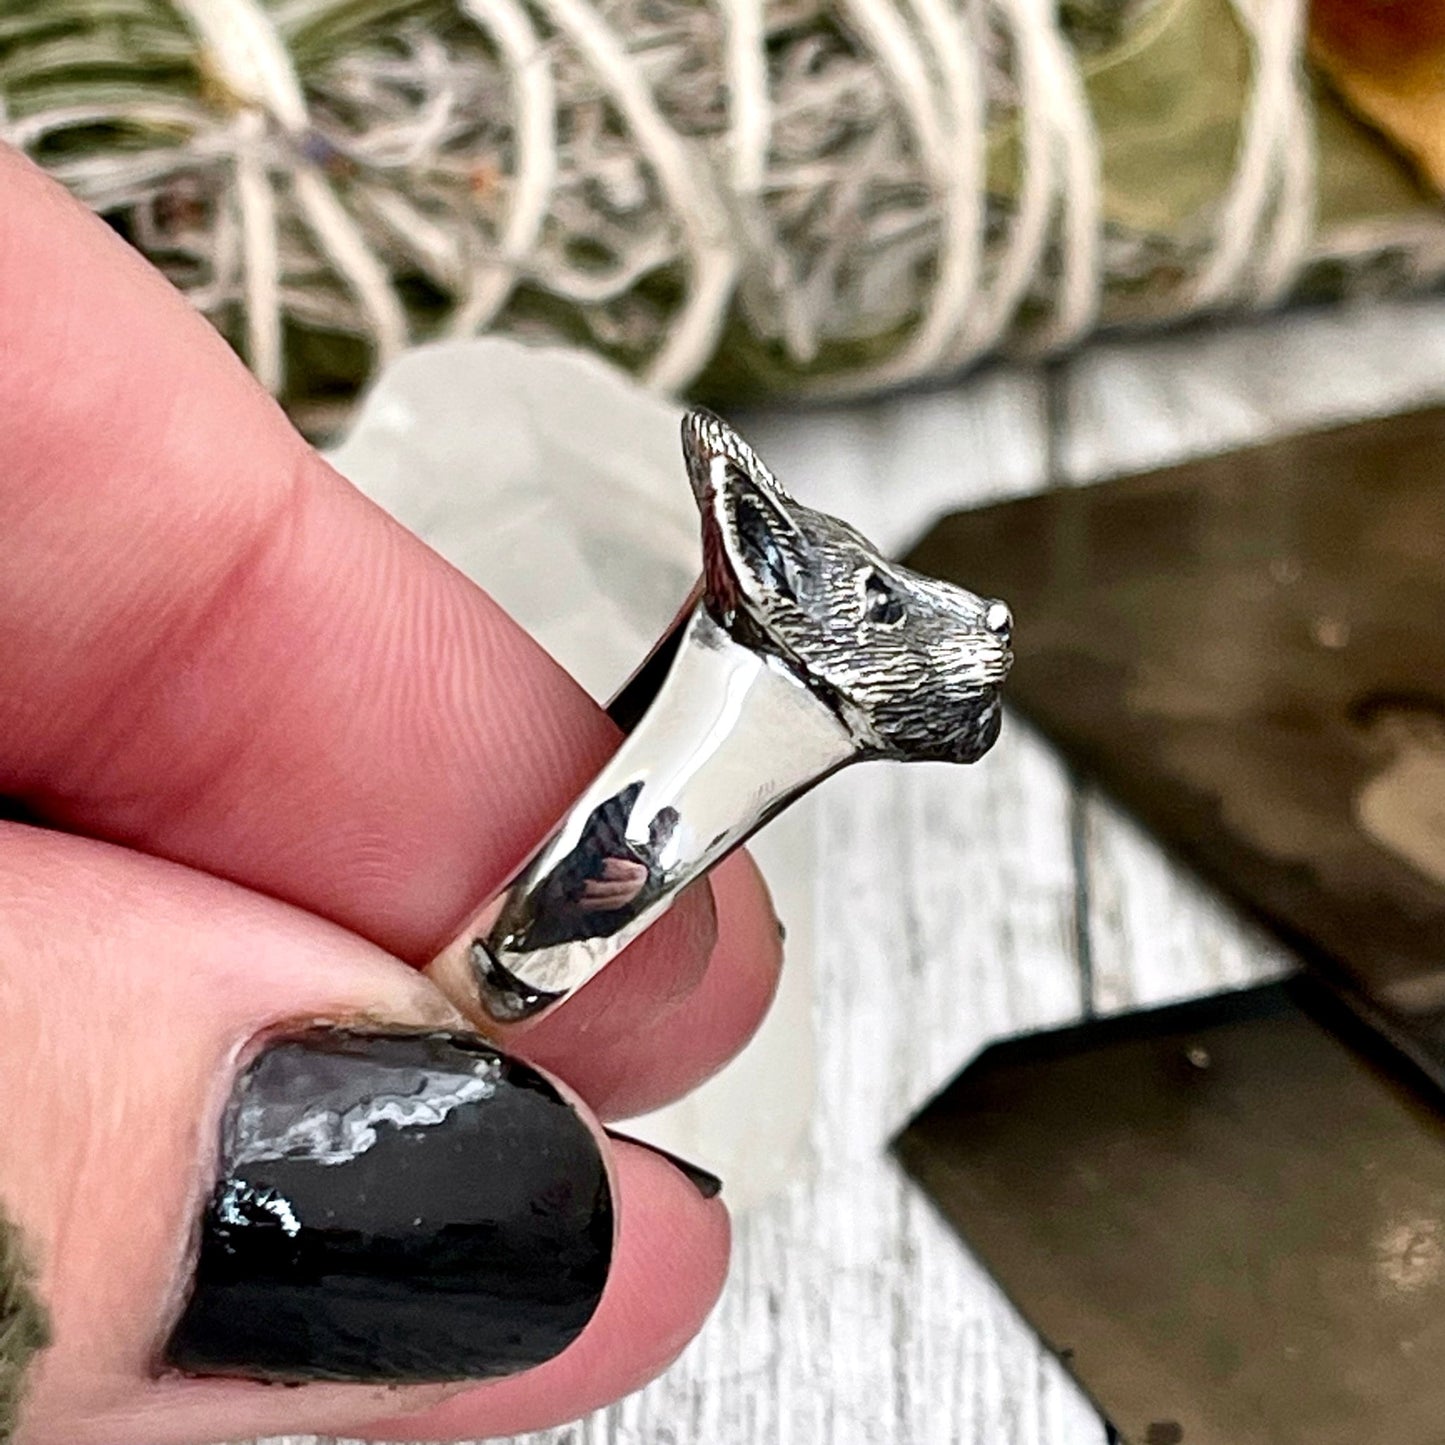 Bohemian Ring, boho jewelry, boho ring, Cat Ring, Etsy ID: 1562200059, Festival Jewelry, Gothic Jewelry, gypsy ring, Halloween Jewelry, Jewelry, Large Crystal, Rings, Statement Rings, Tiny Talisman, TINY TALISMANS, Witch Jewelry, Witch necklace, Witchy Ne